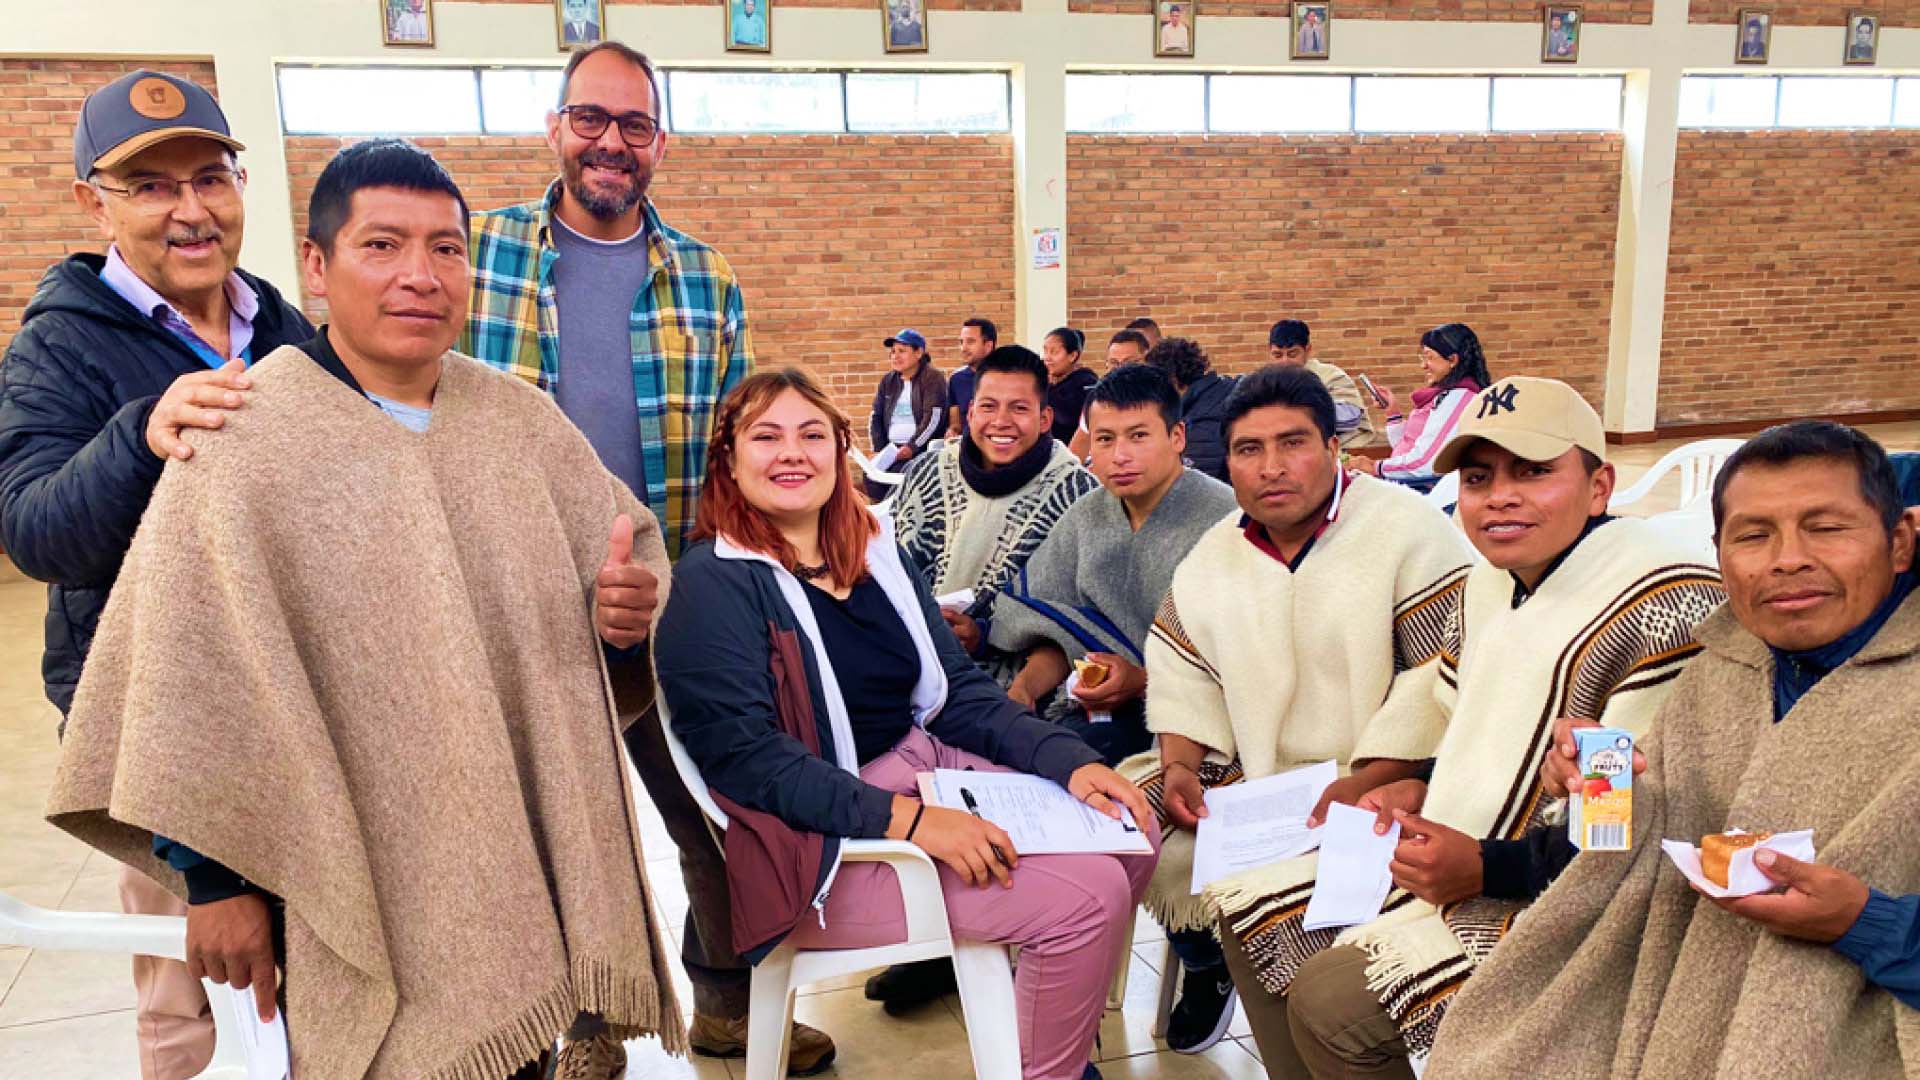 Members of the research team smiling with members of the community who are wearing cream, gray or light brown ponchos while sitting on white plastic chairs in a brick building